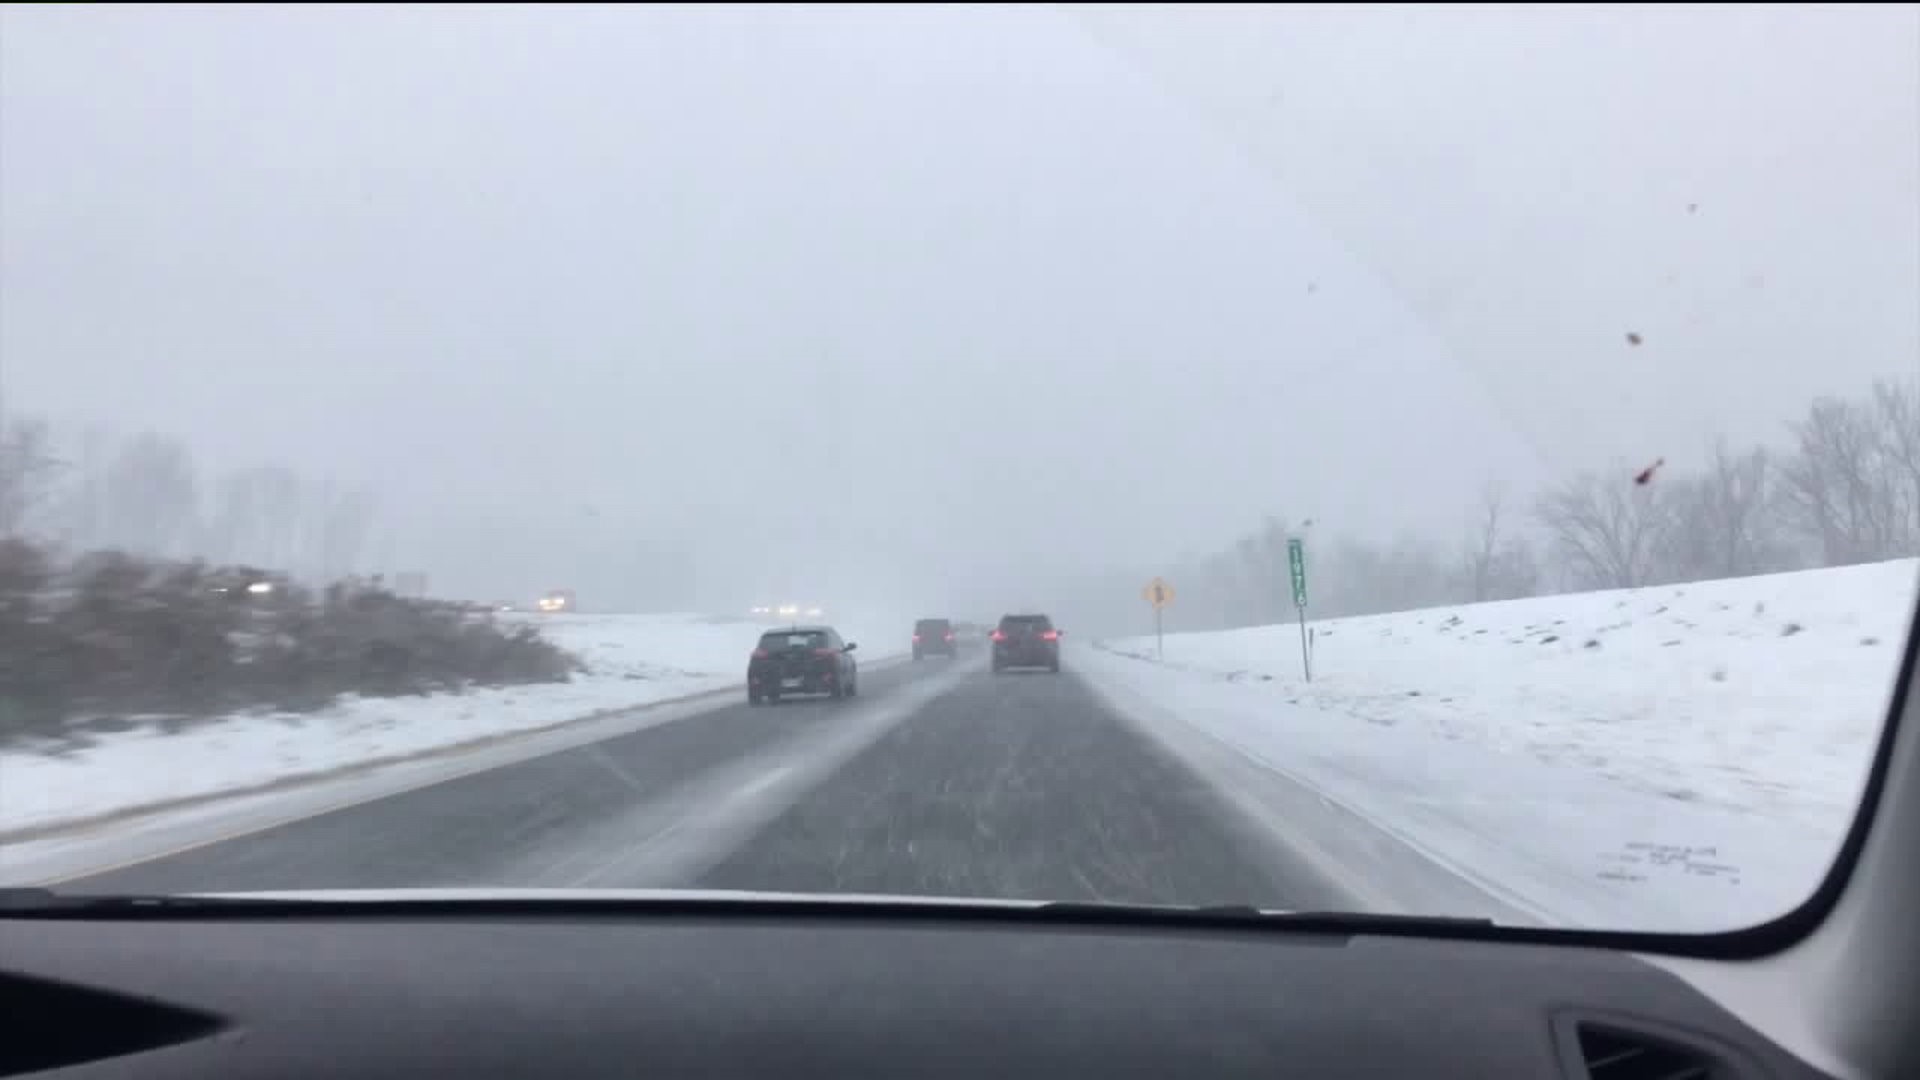 Holiday Travelers Deal with White-out Conditions on Highways